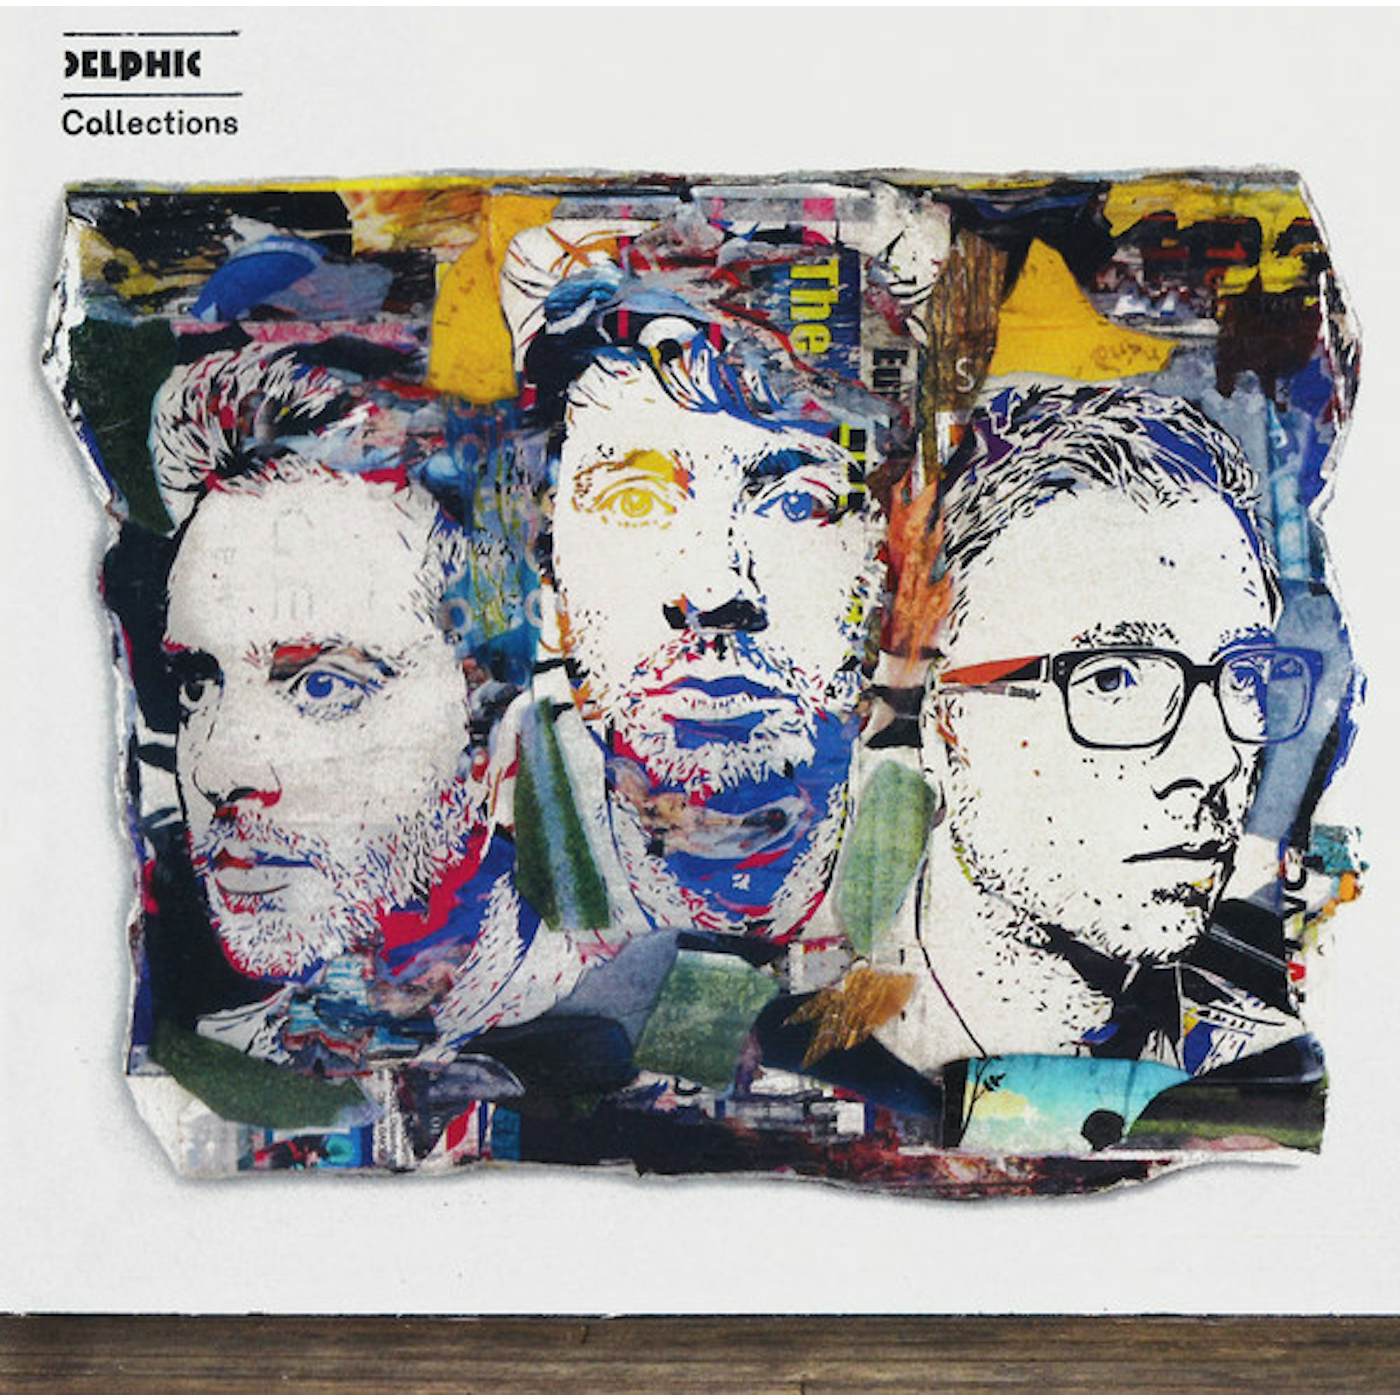 Delphic COLLECTIONS CD